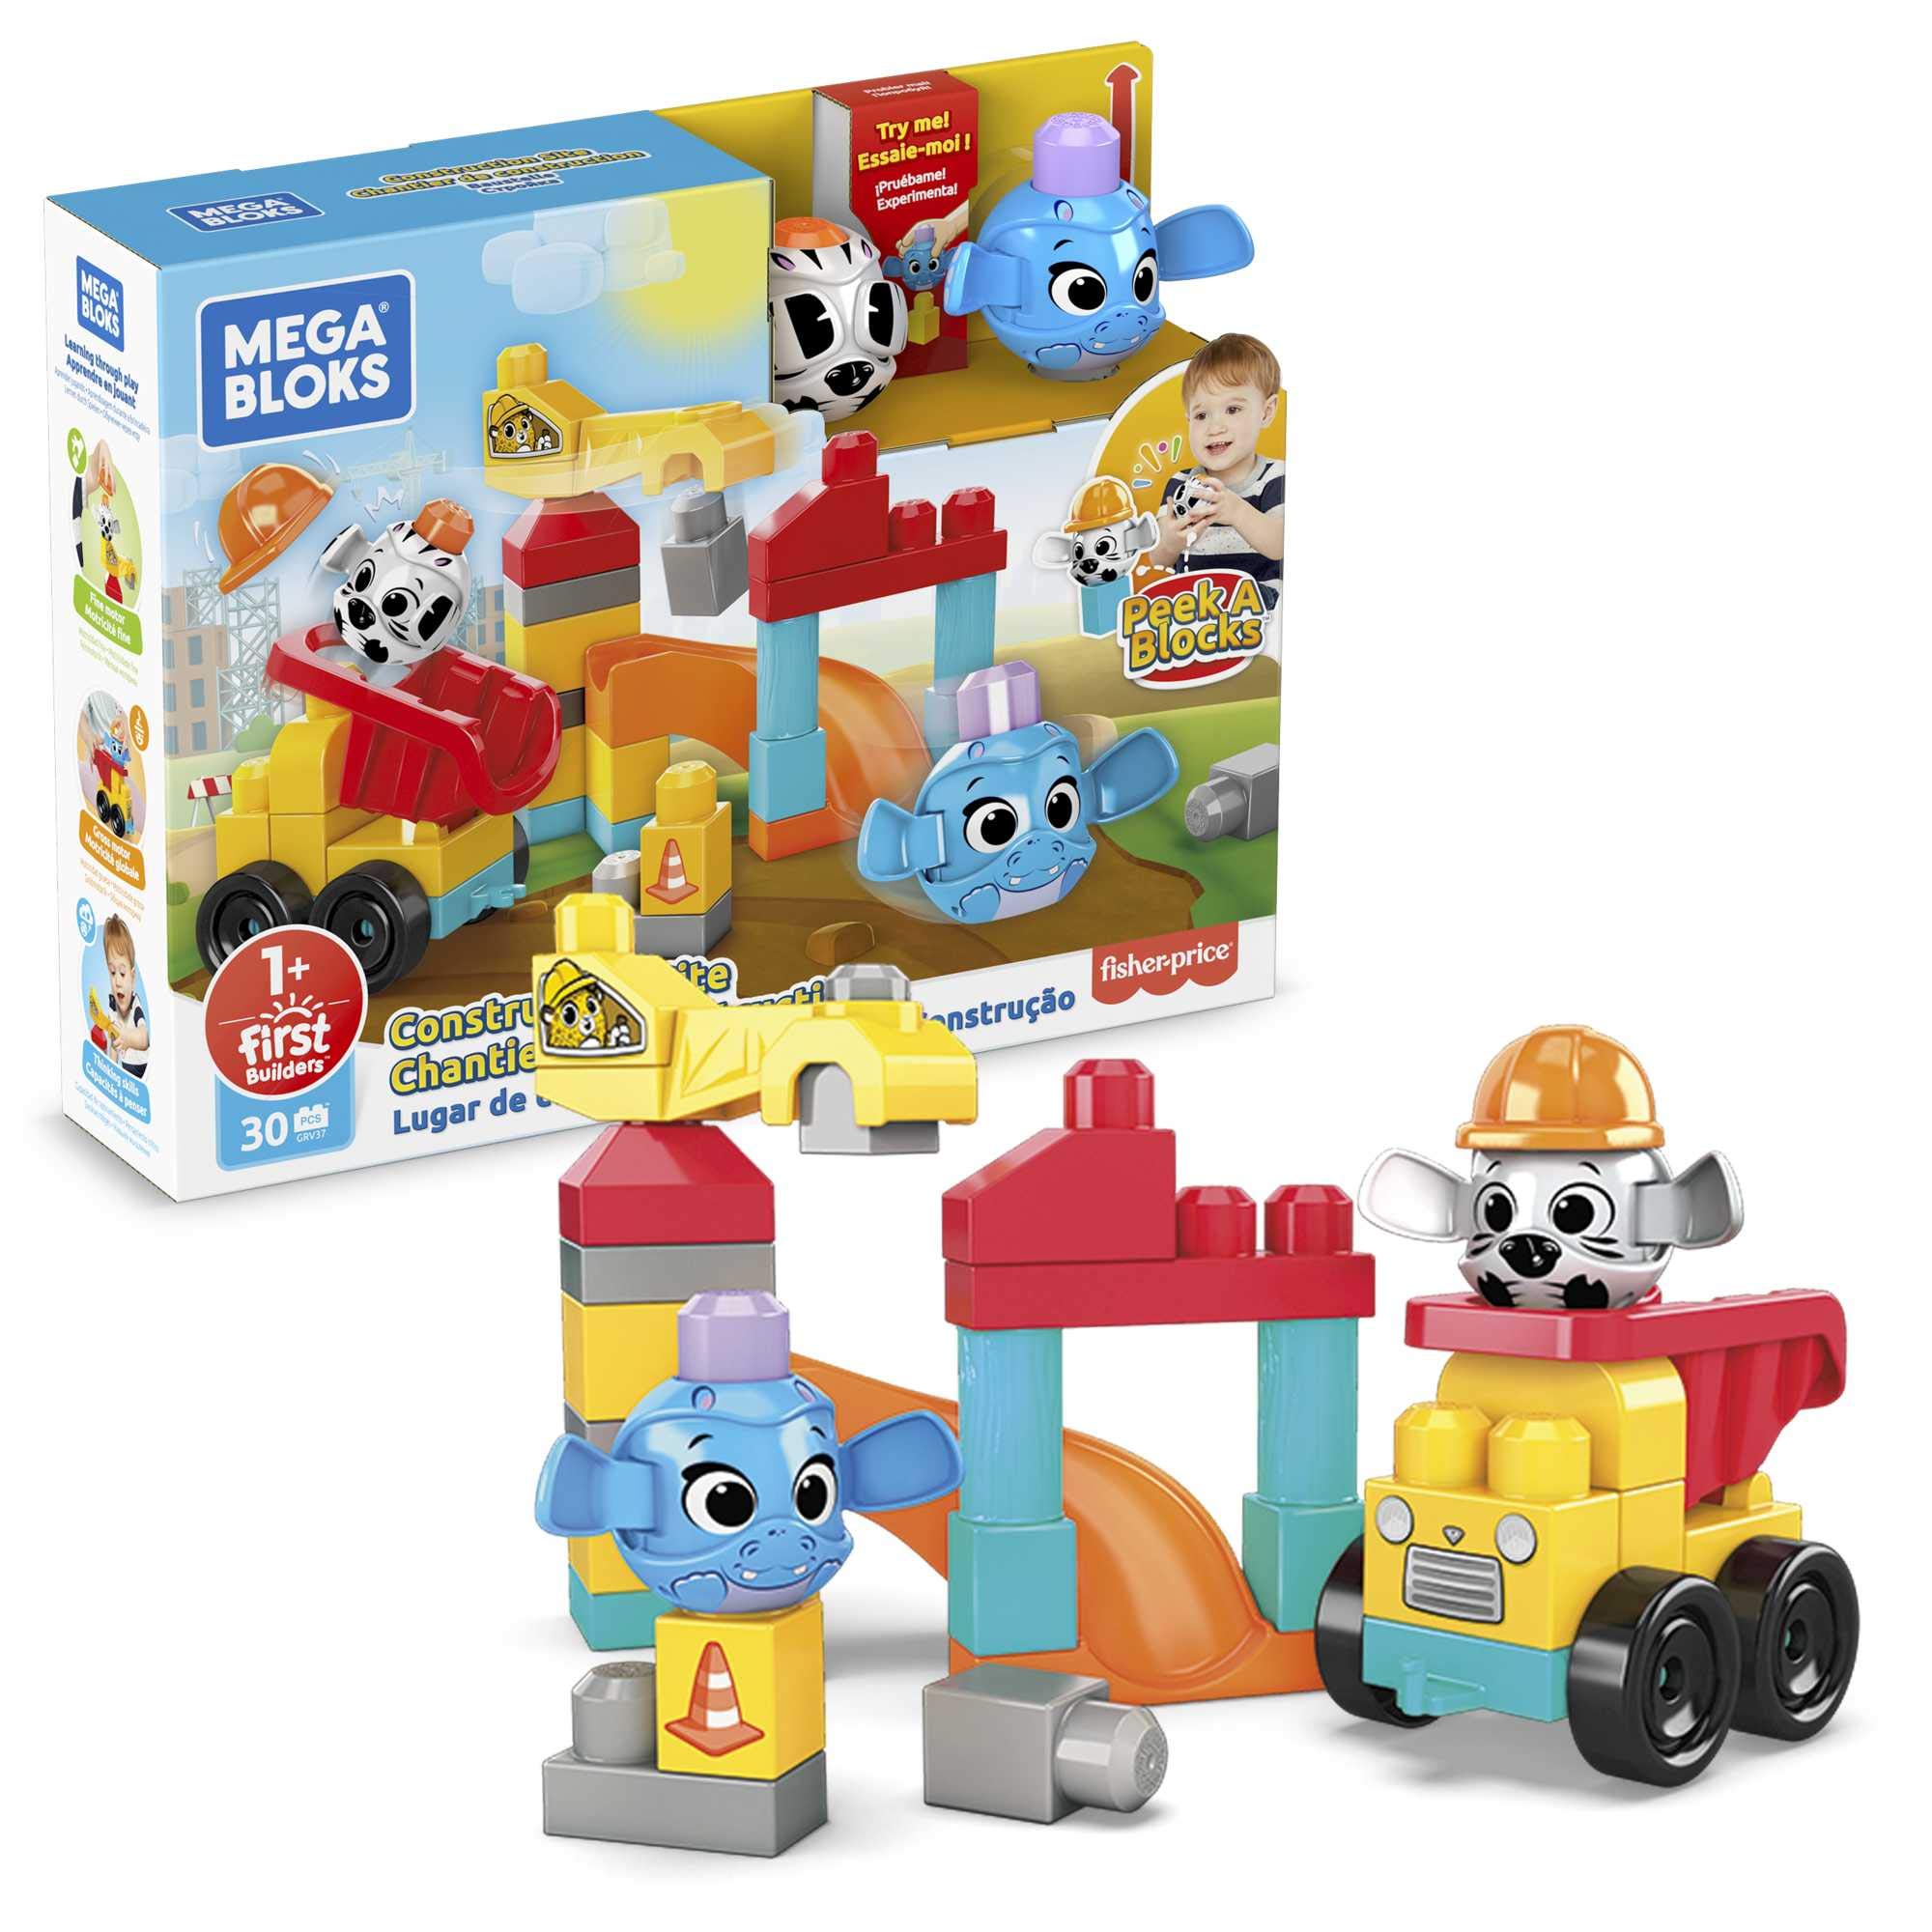 Mega Bloks Peek A Blocks Construction Site, Building Toys for Toddlers for ages 1 years and up (30 Pieces)